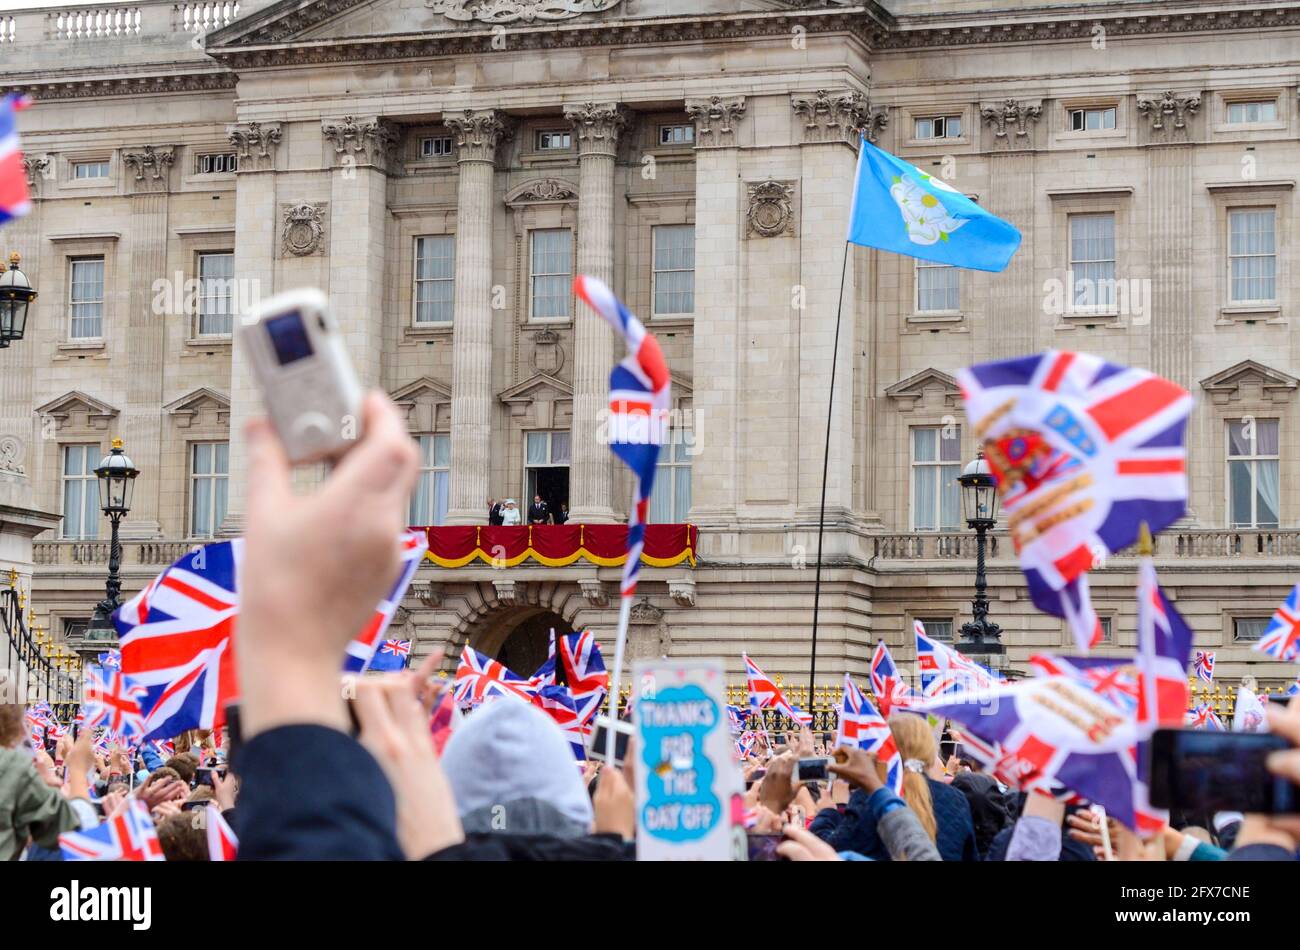 Crowds outside Buckingham Palace at the Queens Diamond Jubilee celebration in London, UK, with The Queen and family on the balcony in distance Stock Photo